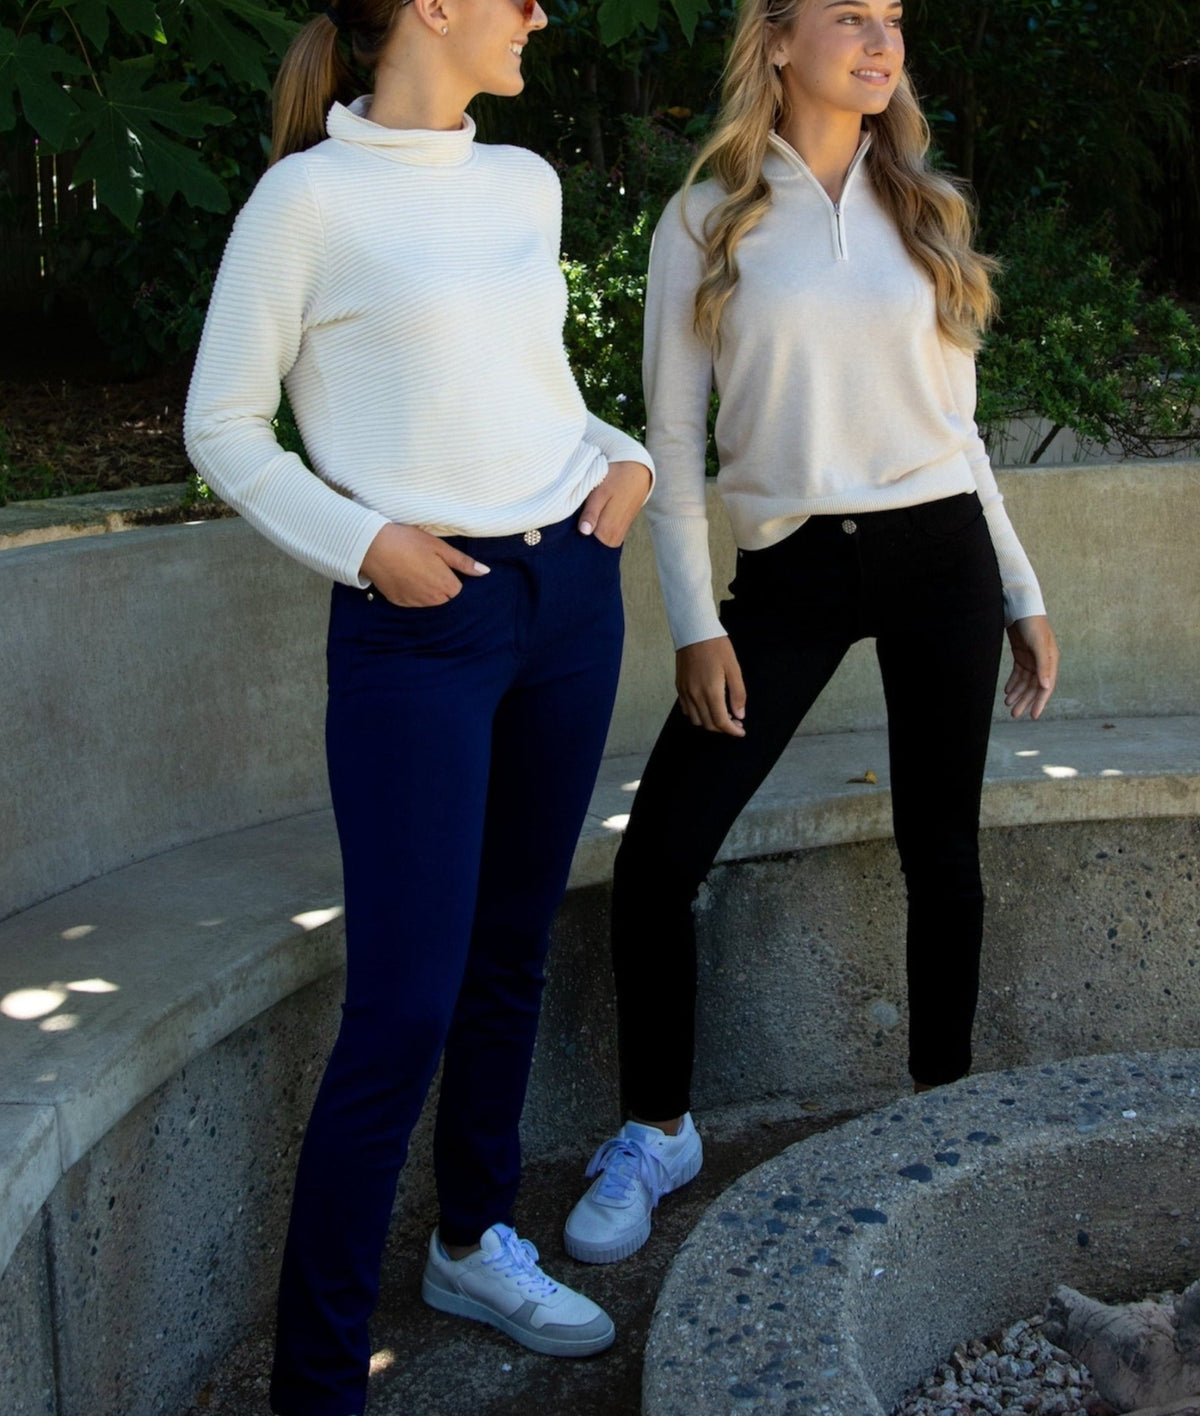 This photo shows one woman wearing the Navy Eliza 5-Pocket Jersey pant with the Ellie Cotton Sweater, while the other woman wears the Eliza Pant in Black, paired with the Luna Organic Cotton 1/4-Zip Sweater in Linen Beige.